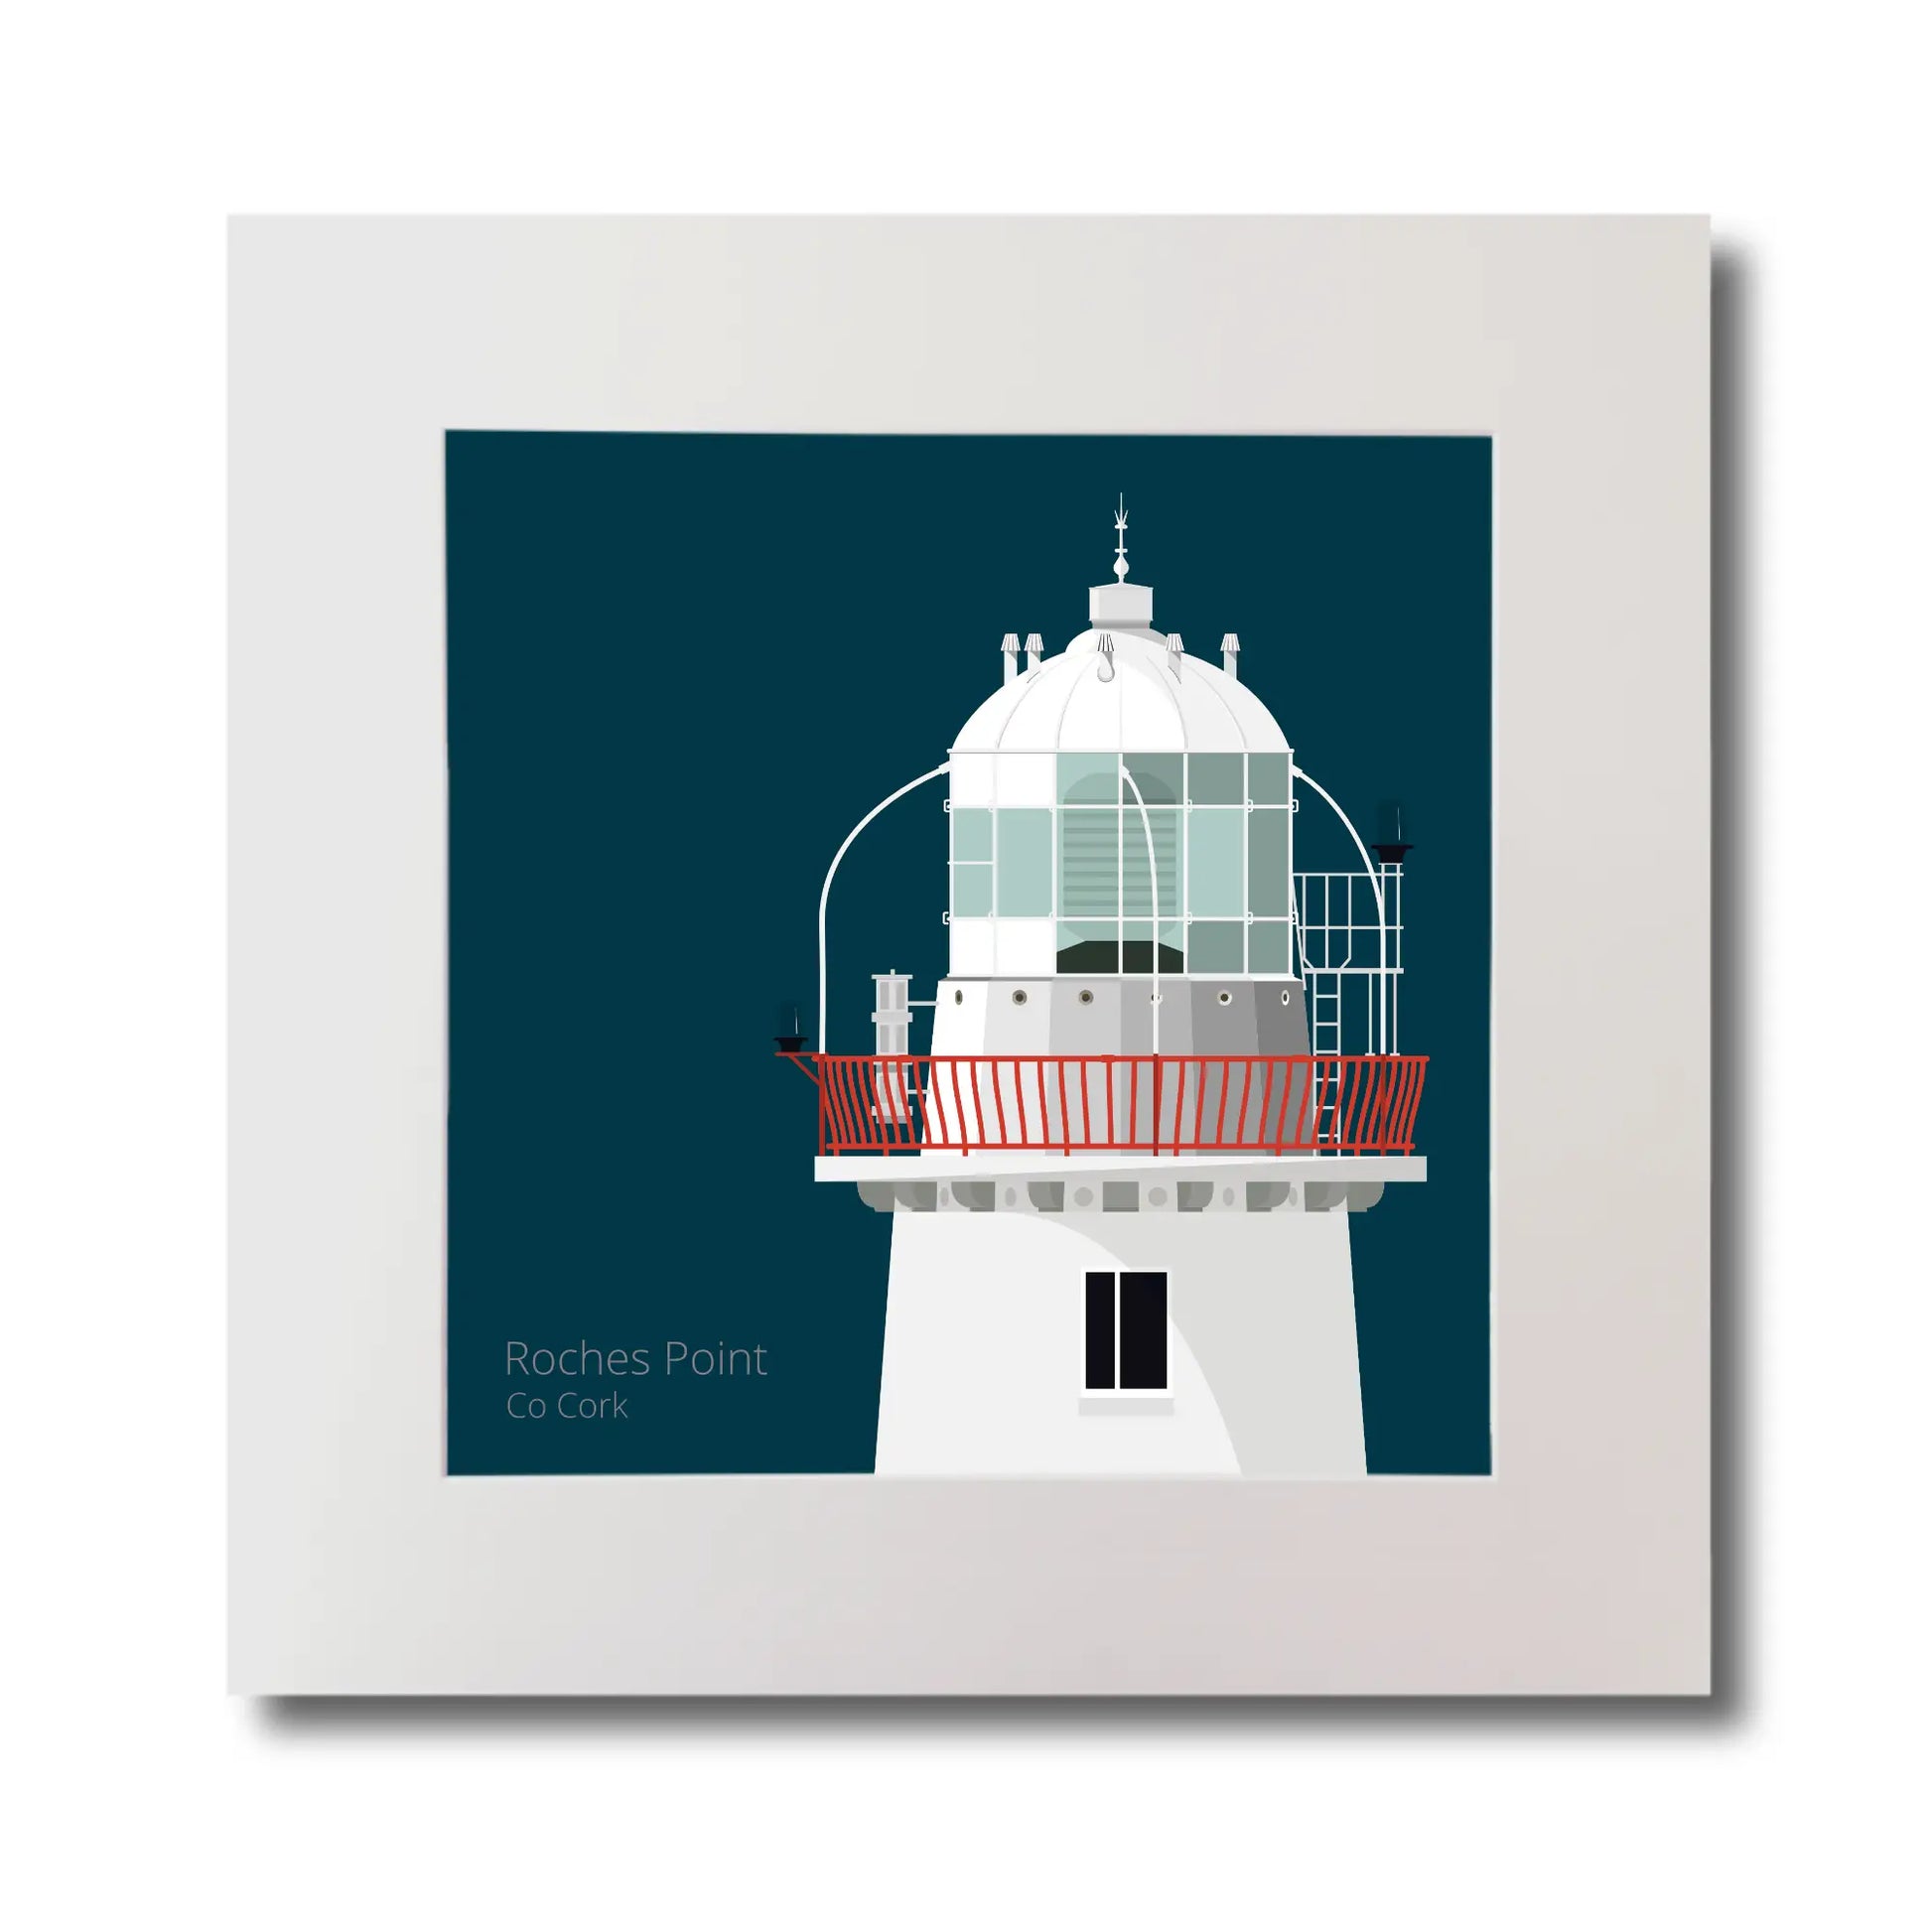 Illustration of Roches Point lighthouse on a midnight blue background, mounted and measuring 30x30cm.